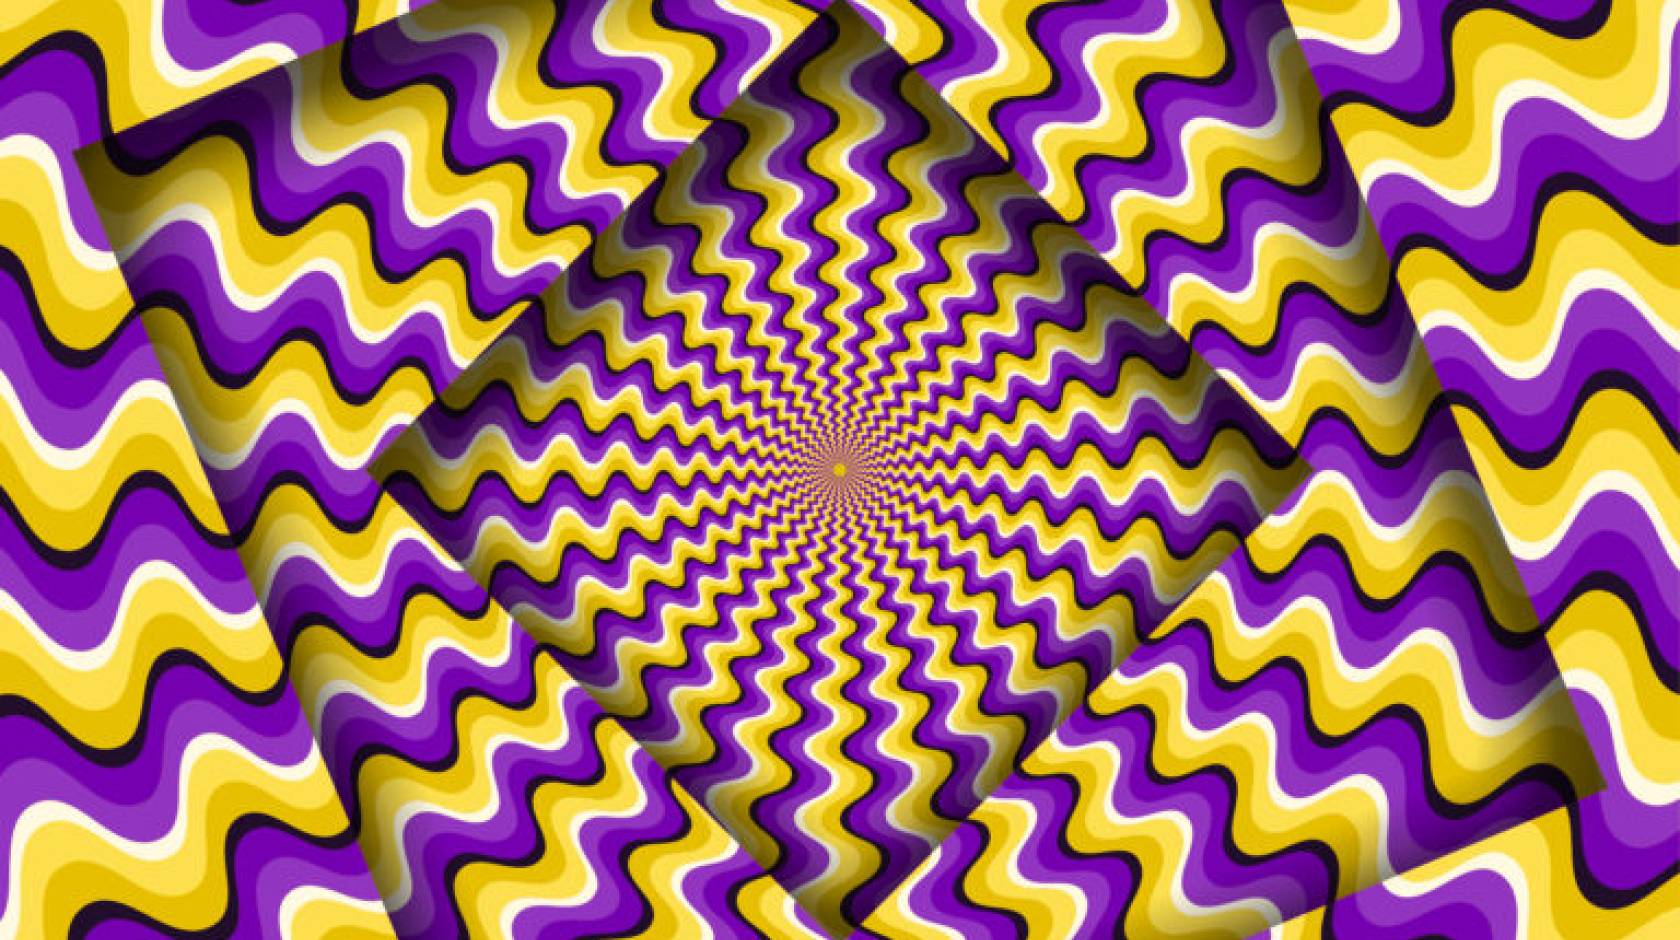 Image of squares covered in yellow and purple squiggles that create an optical illusion that the squares are moving.